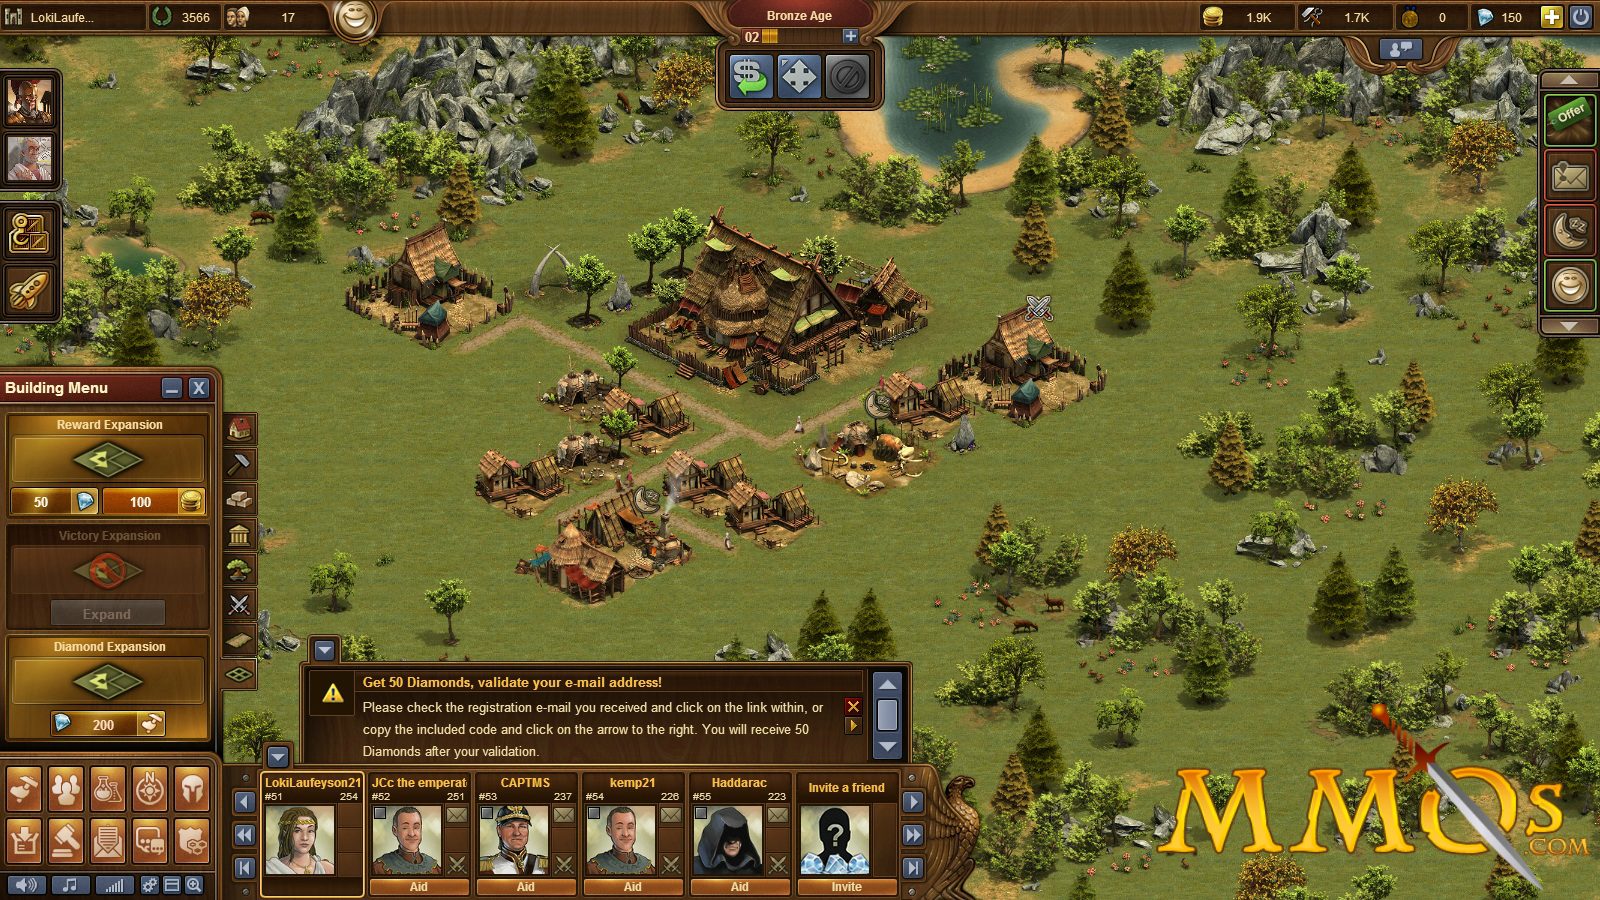 story and side quest in forge of empires